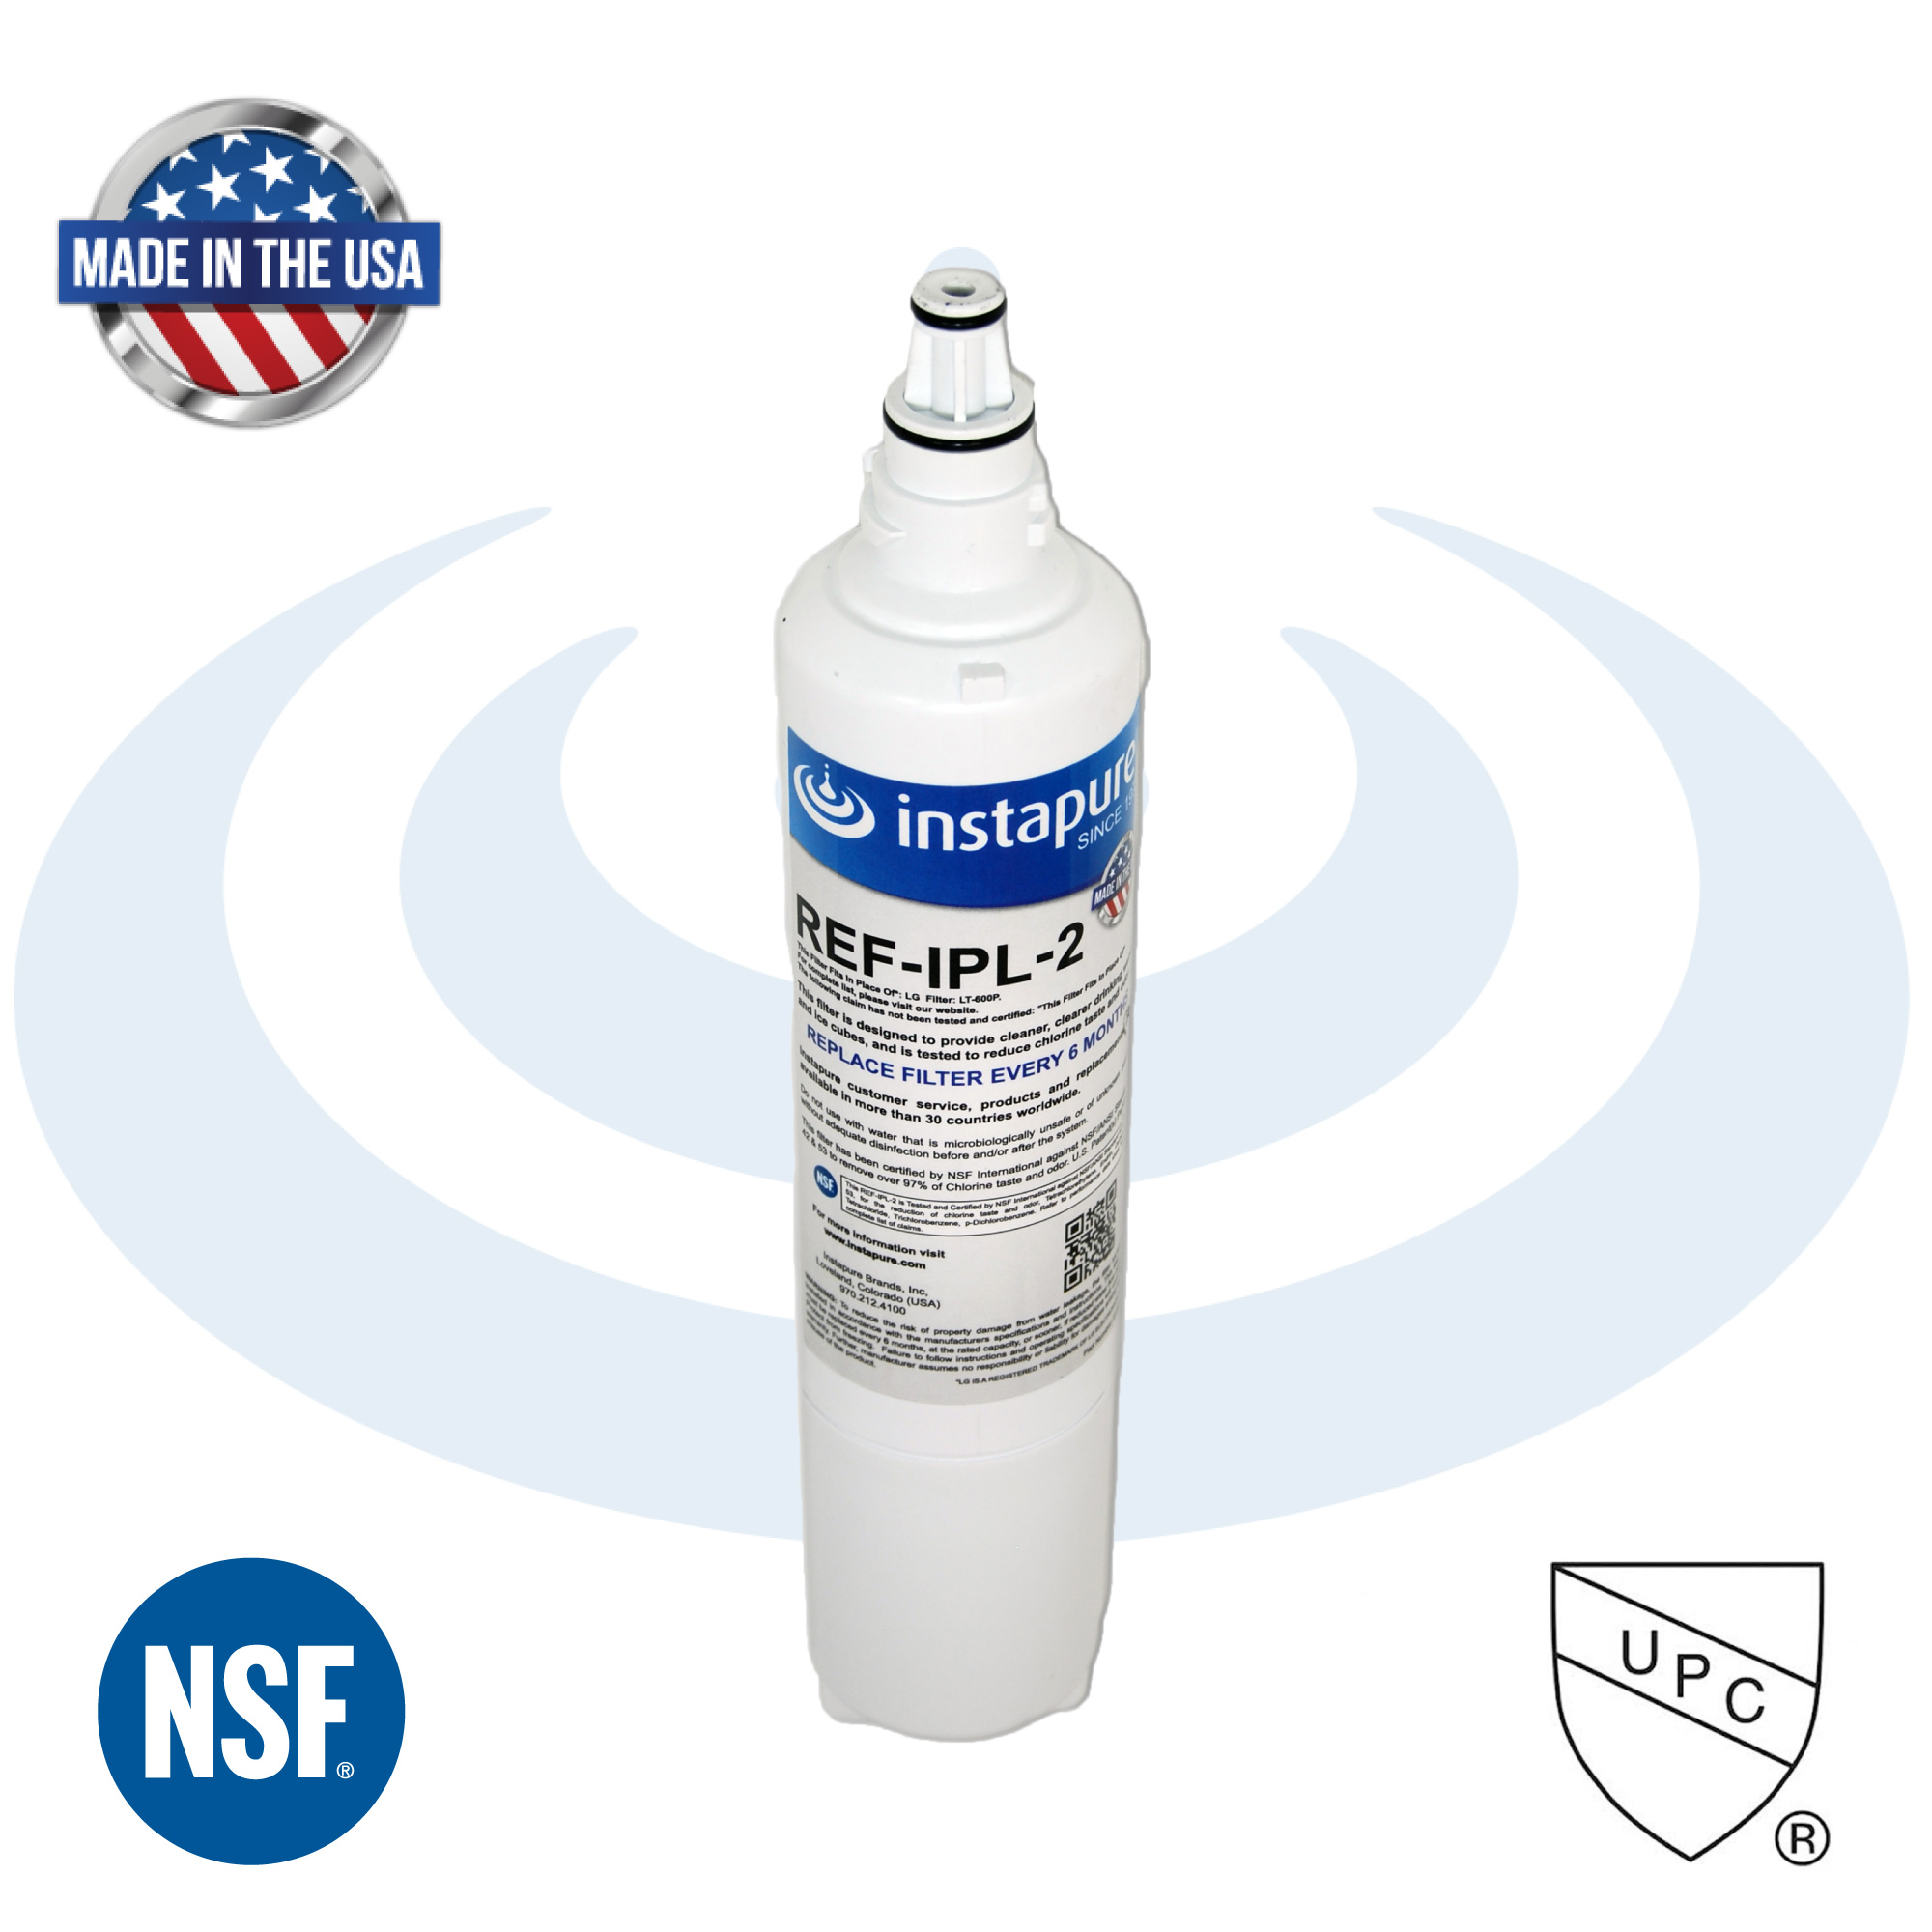 Made in USA LT600P & 46-9990 Compatible Refrigerator Filter by Instapure,  NSF/ANSI 42, 53, P473, 401 Certified for PFOA/PFOS, Pharmaceuticals, Lead,  